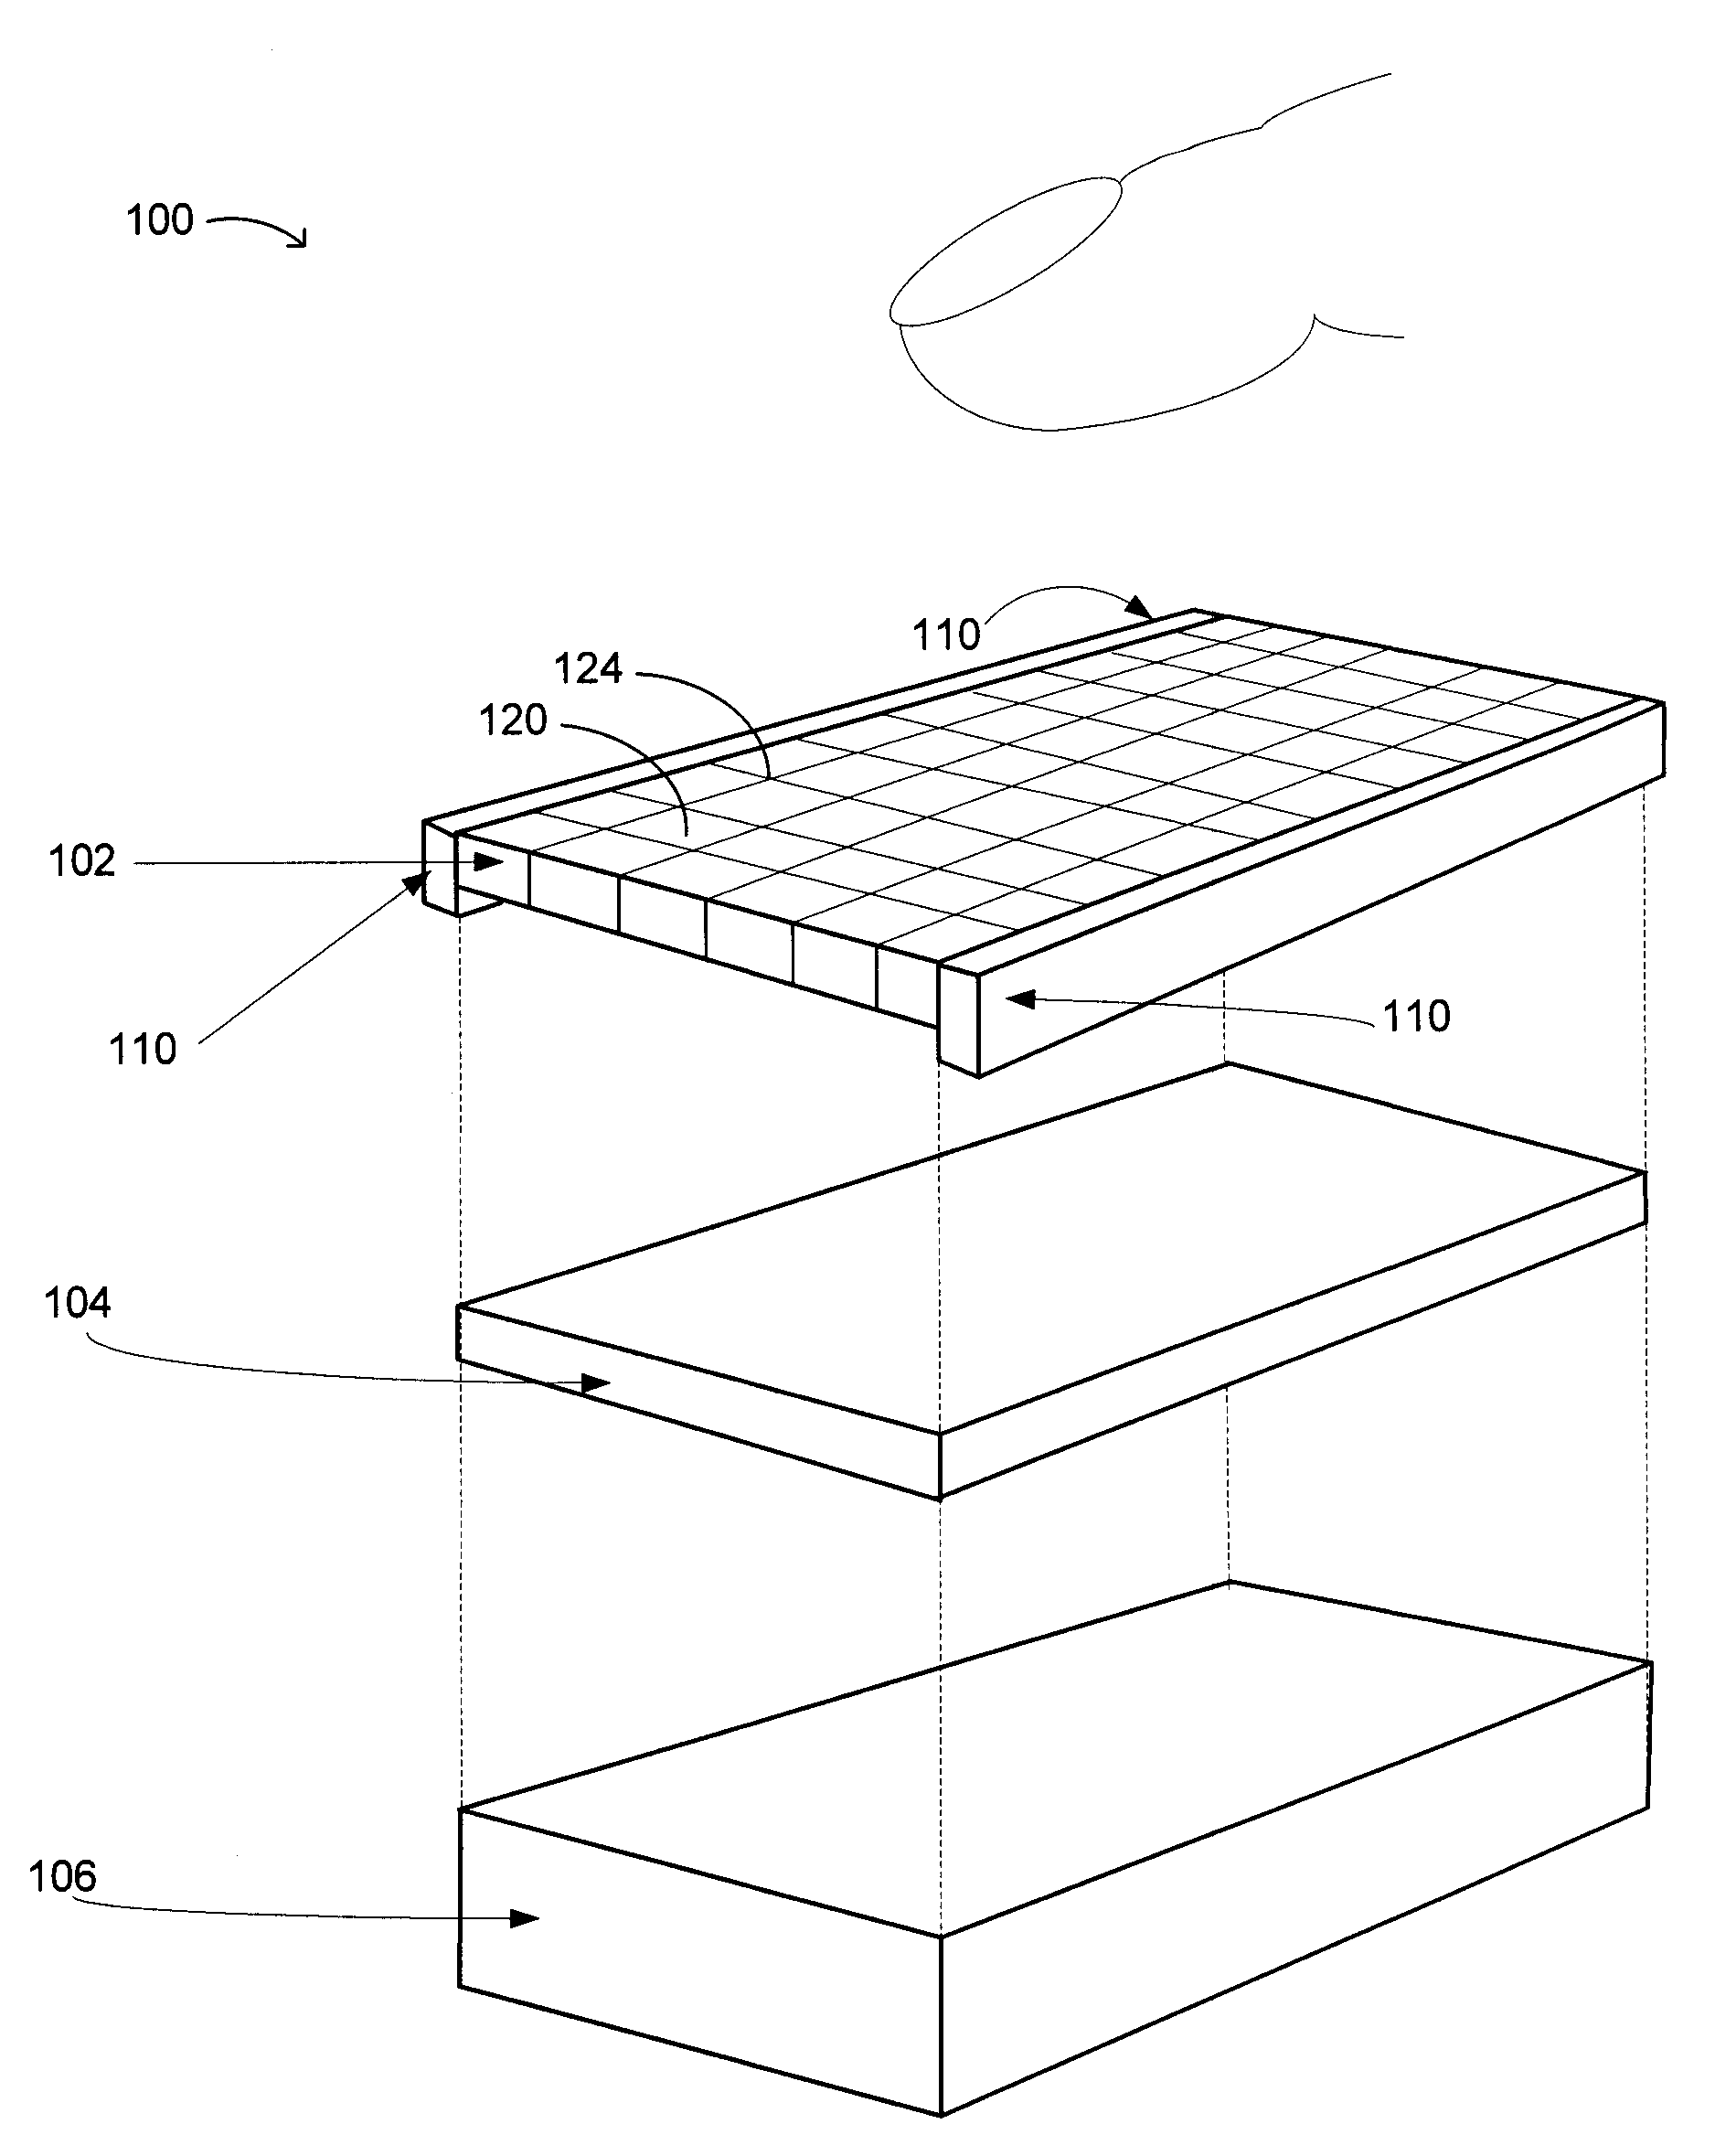 Method and apparatus for generating haptic effects using actuators